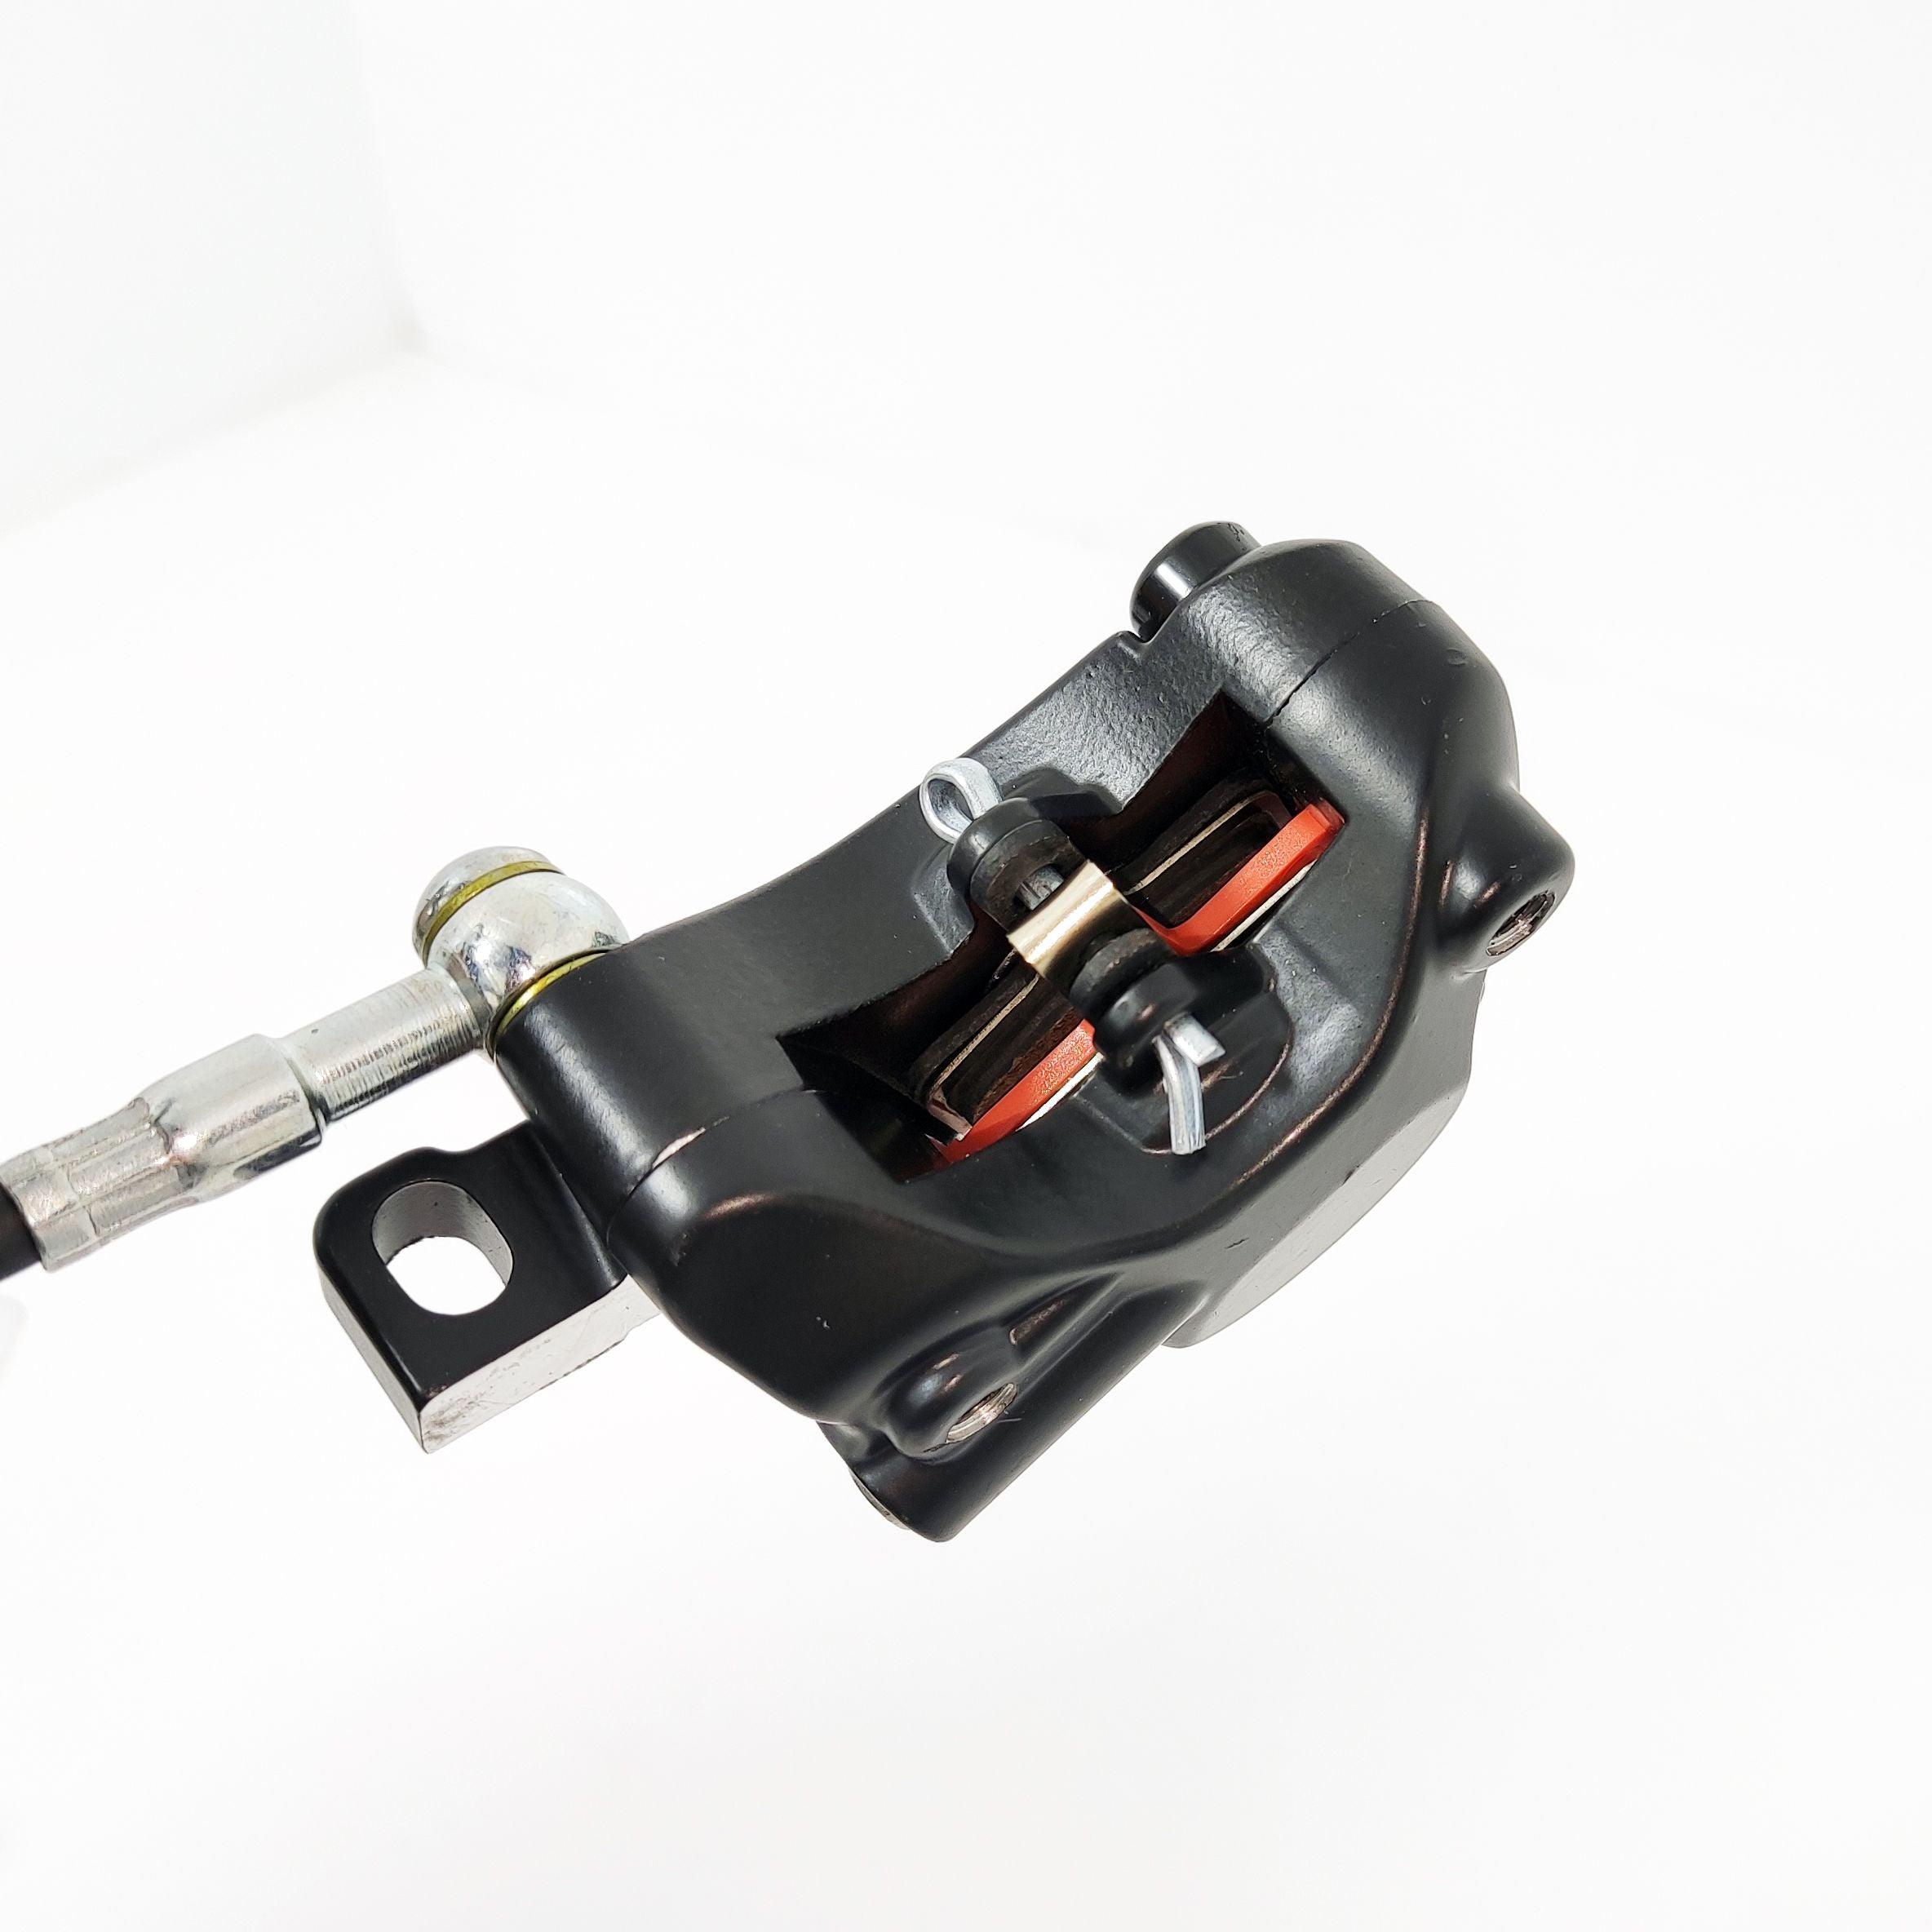 S-scooter hydraulic brakes ( a pair)